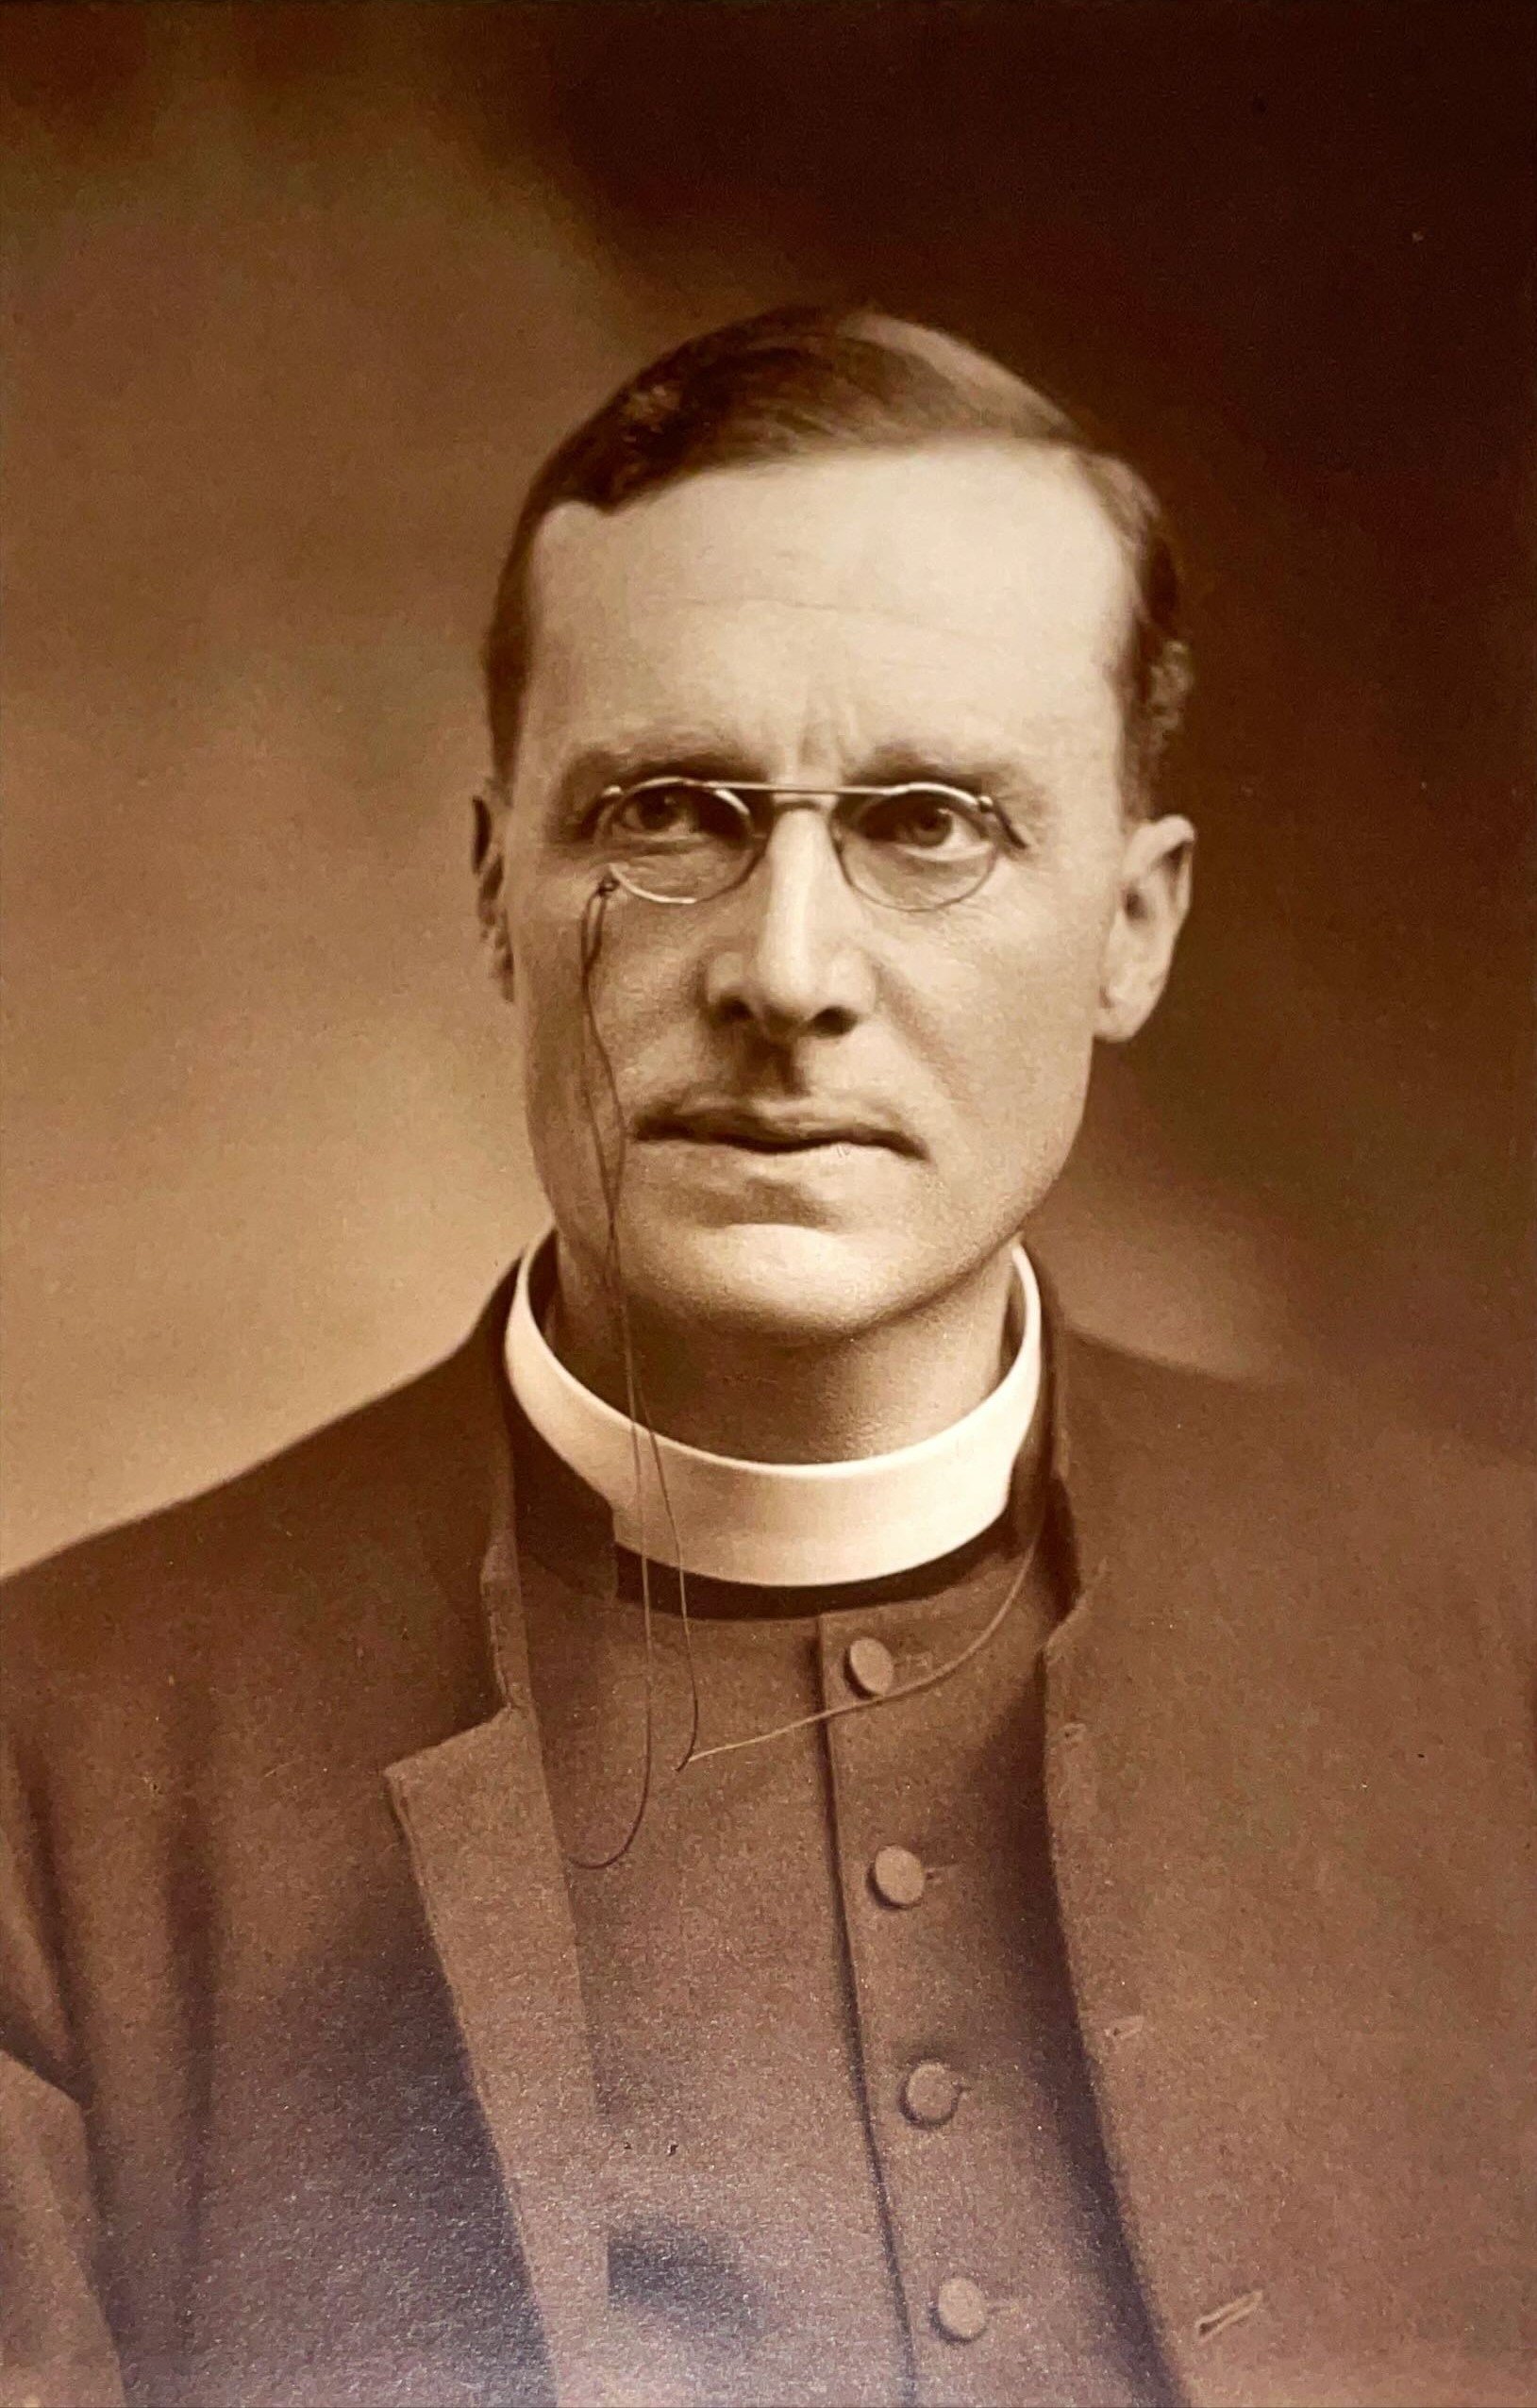 George Cook, Canon 1908-1914